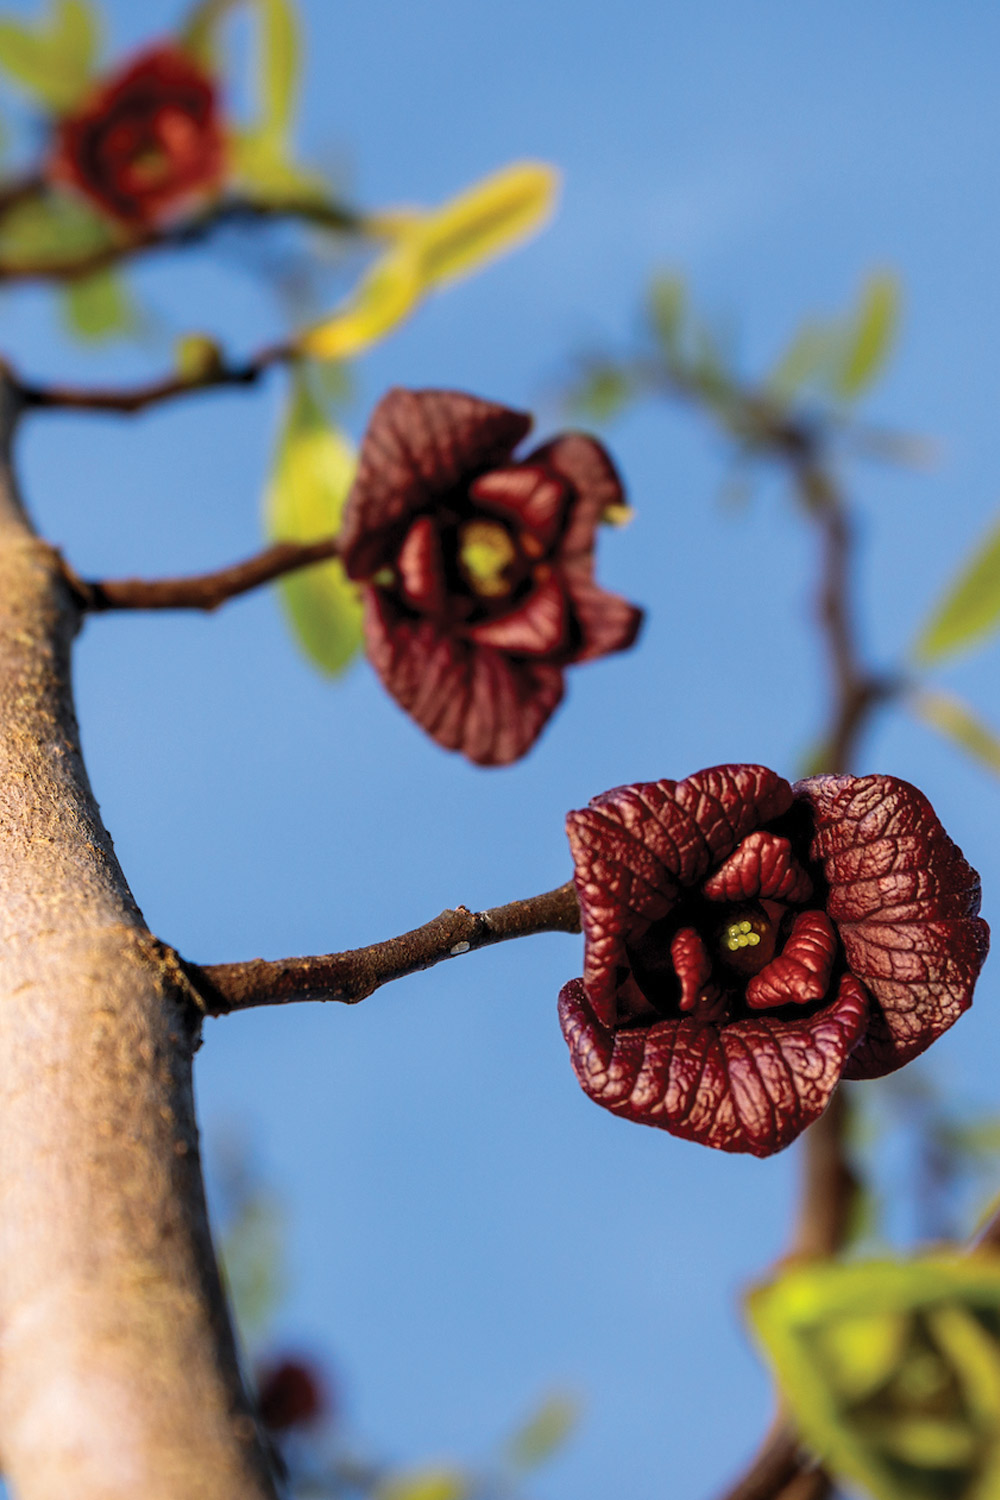 Pawpaw blooms are reddish mahogany in color